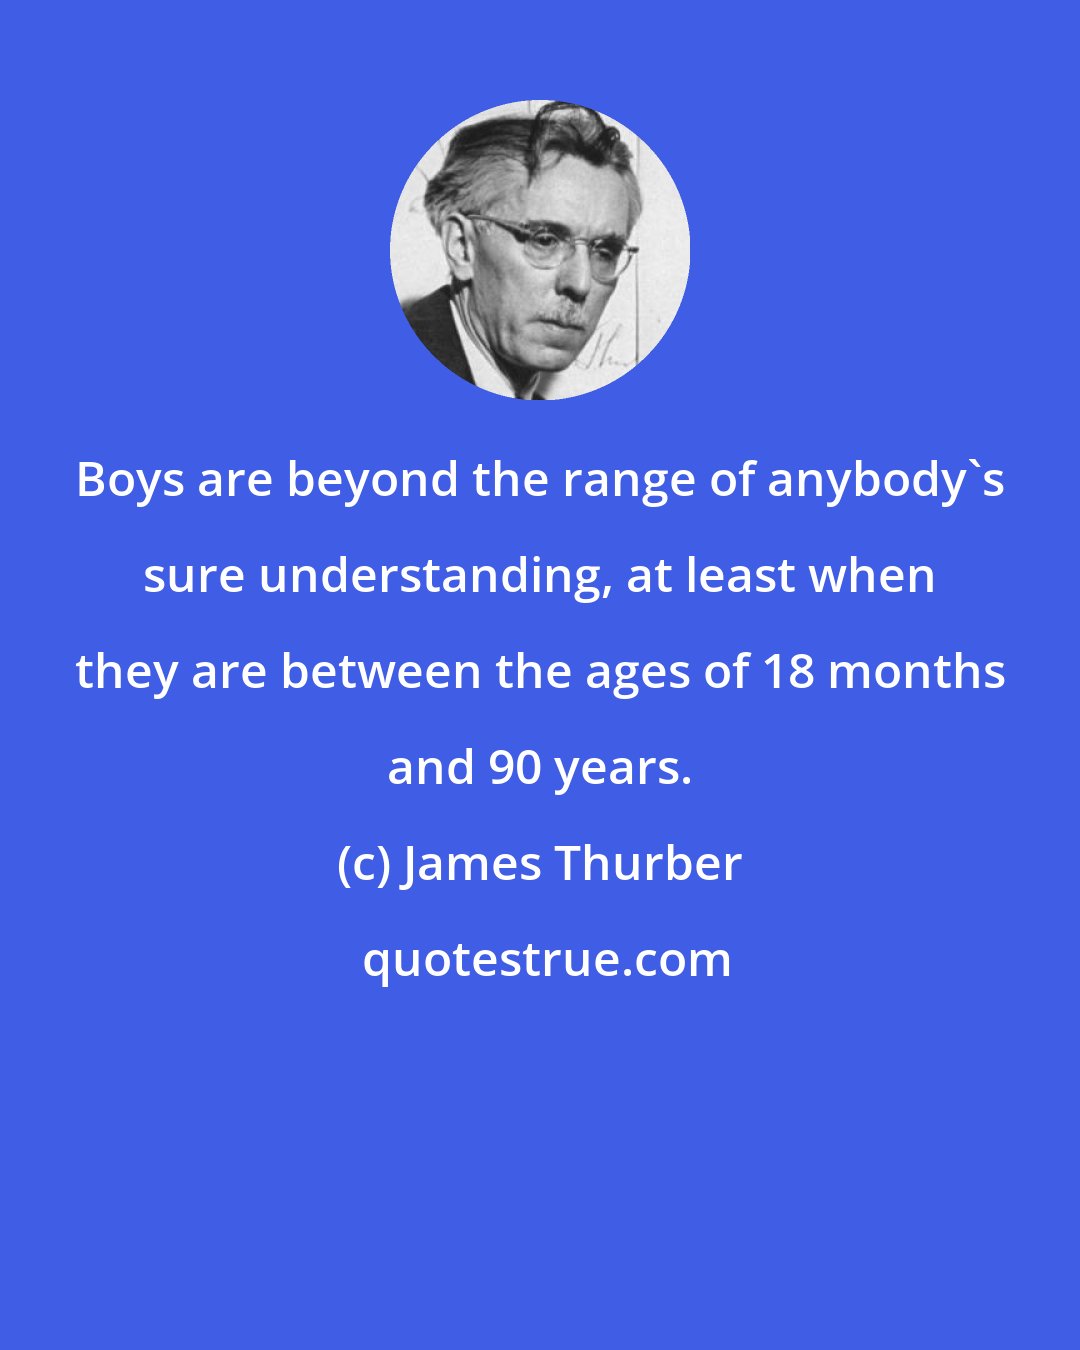 James Thurber: Boys are beyond the range of anybody's sure understanding, at least when they are between the ages of 18 months and 90 years.